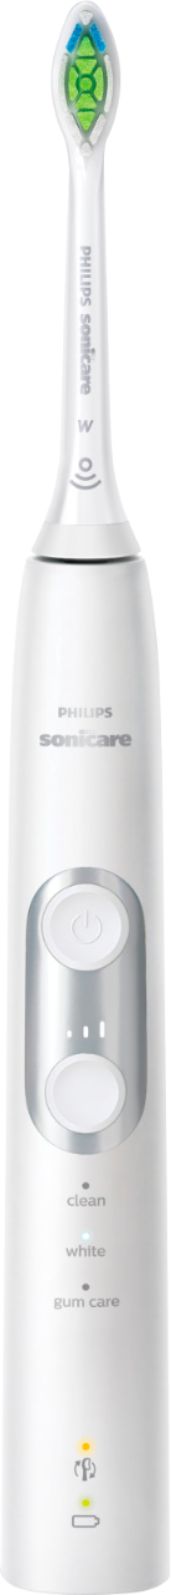 Angle View: Philips Sonicare - ProtectiveClean 6100 Rechargeable Toothbrush - White